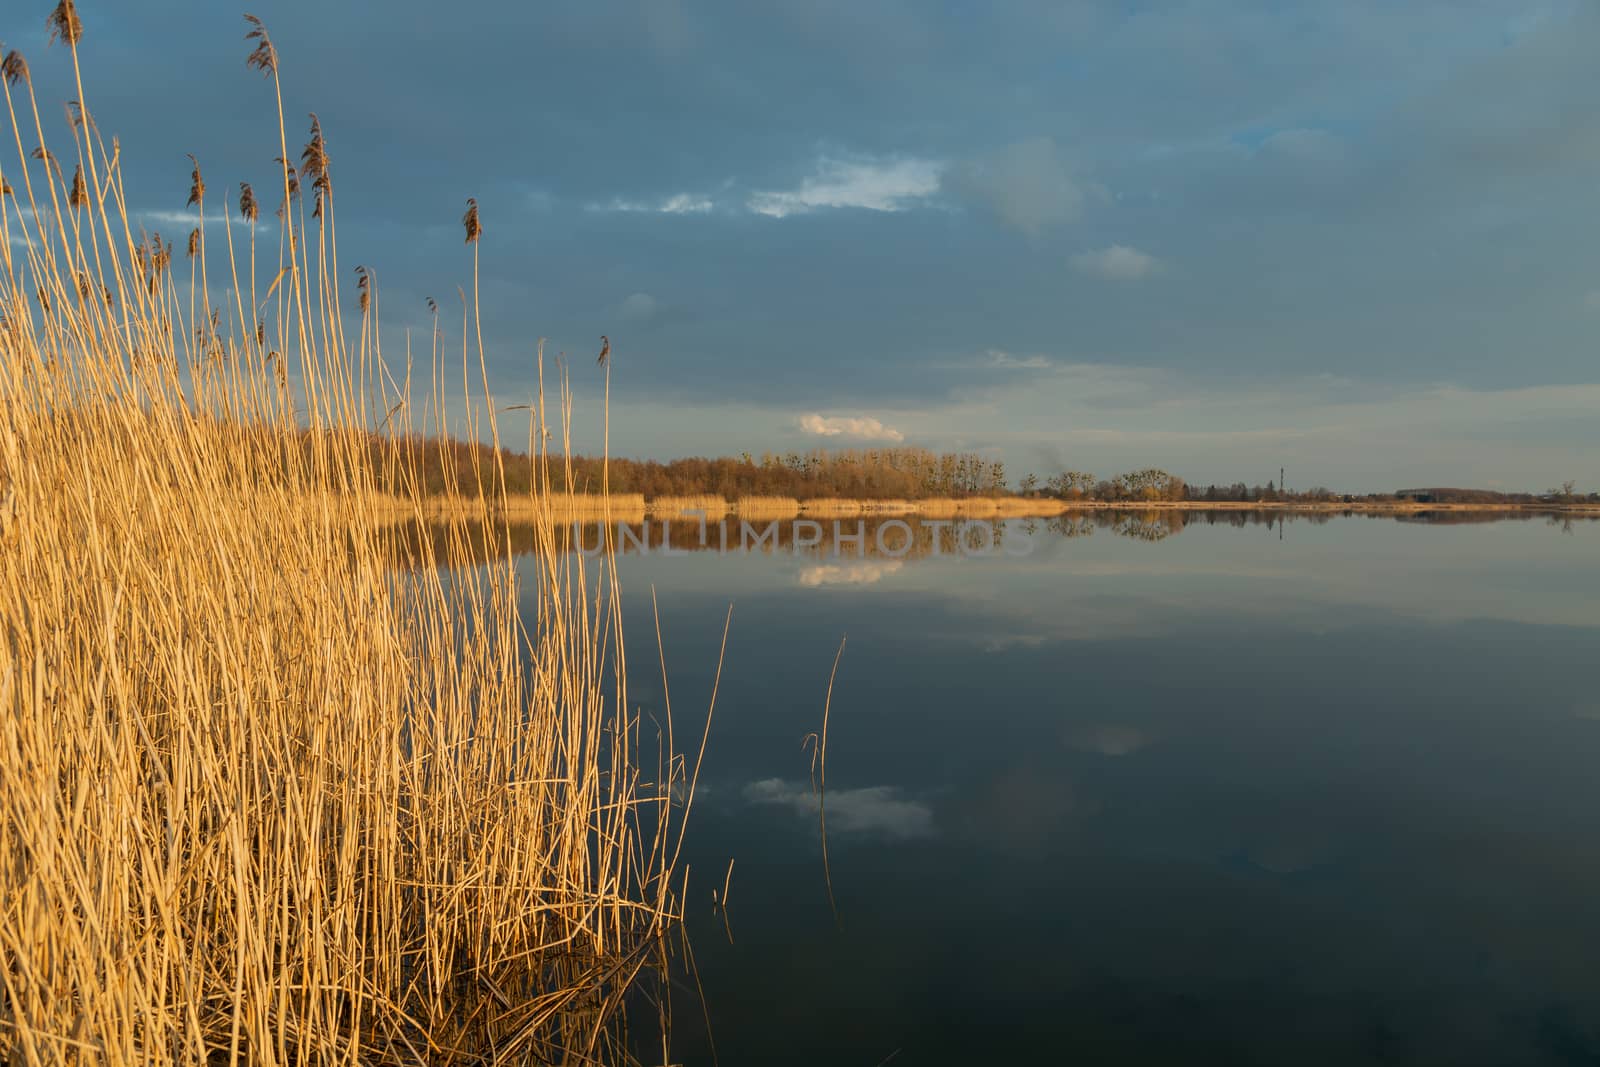 High dry reeds growing in a calm lake, evening dark clouds on the sky